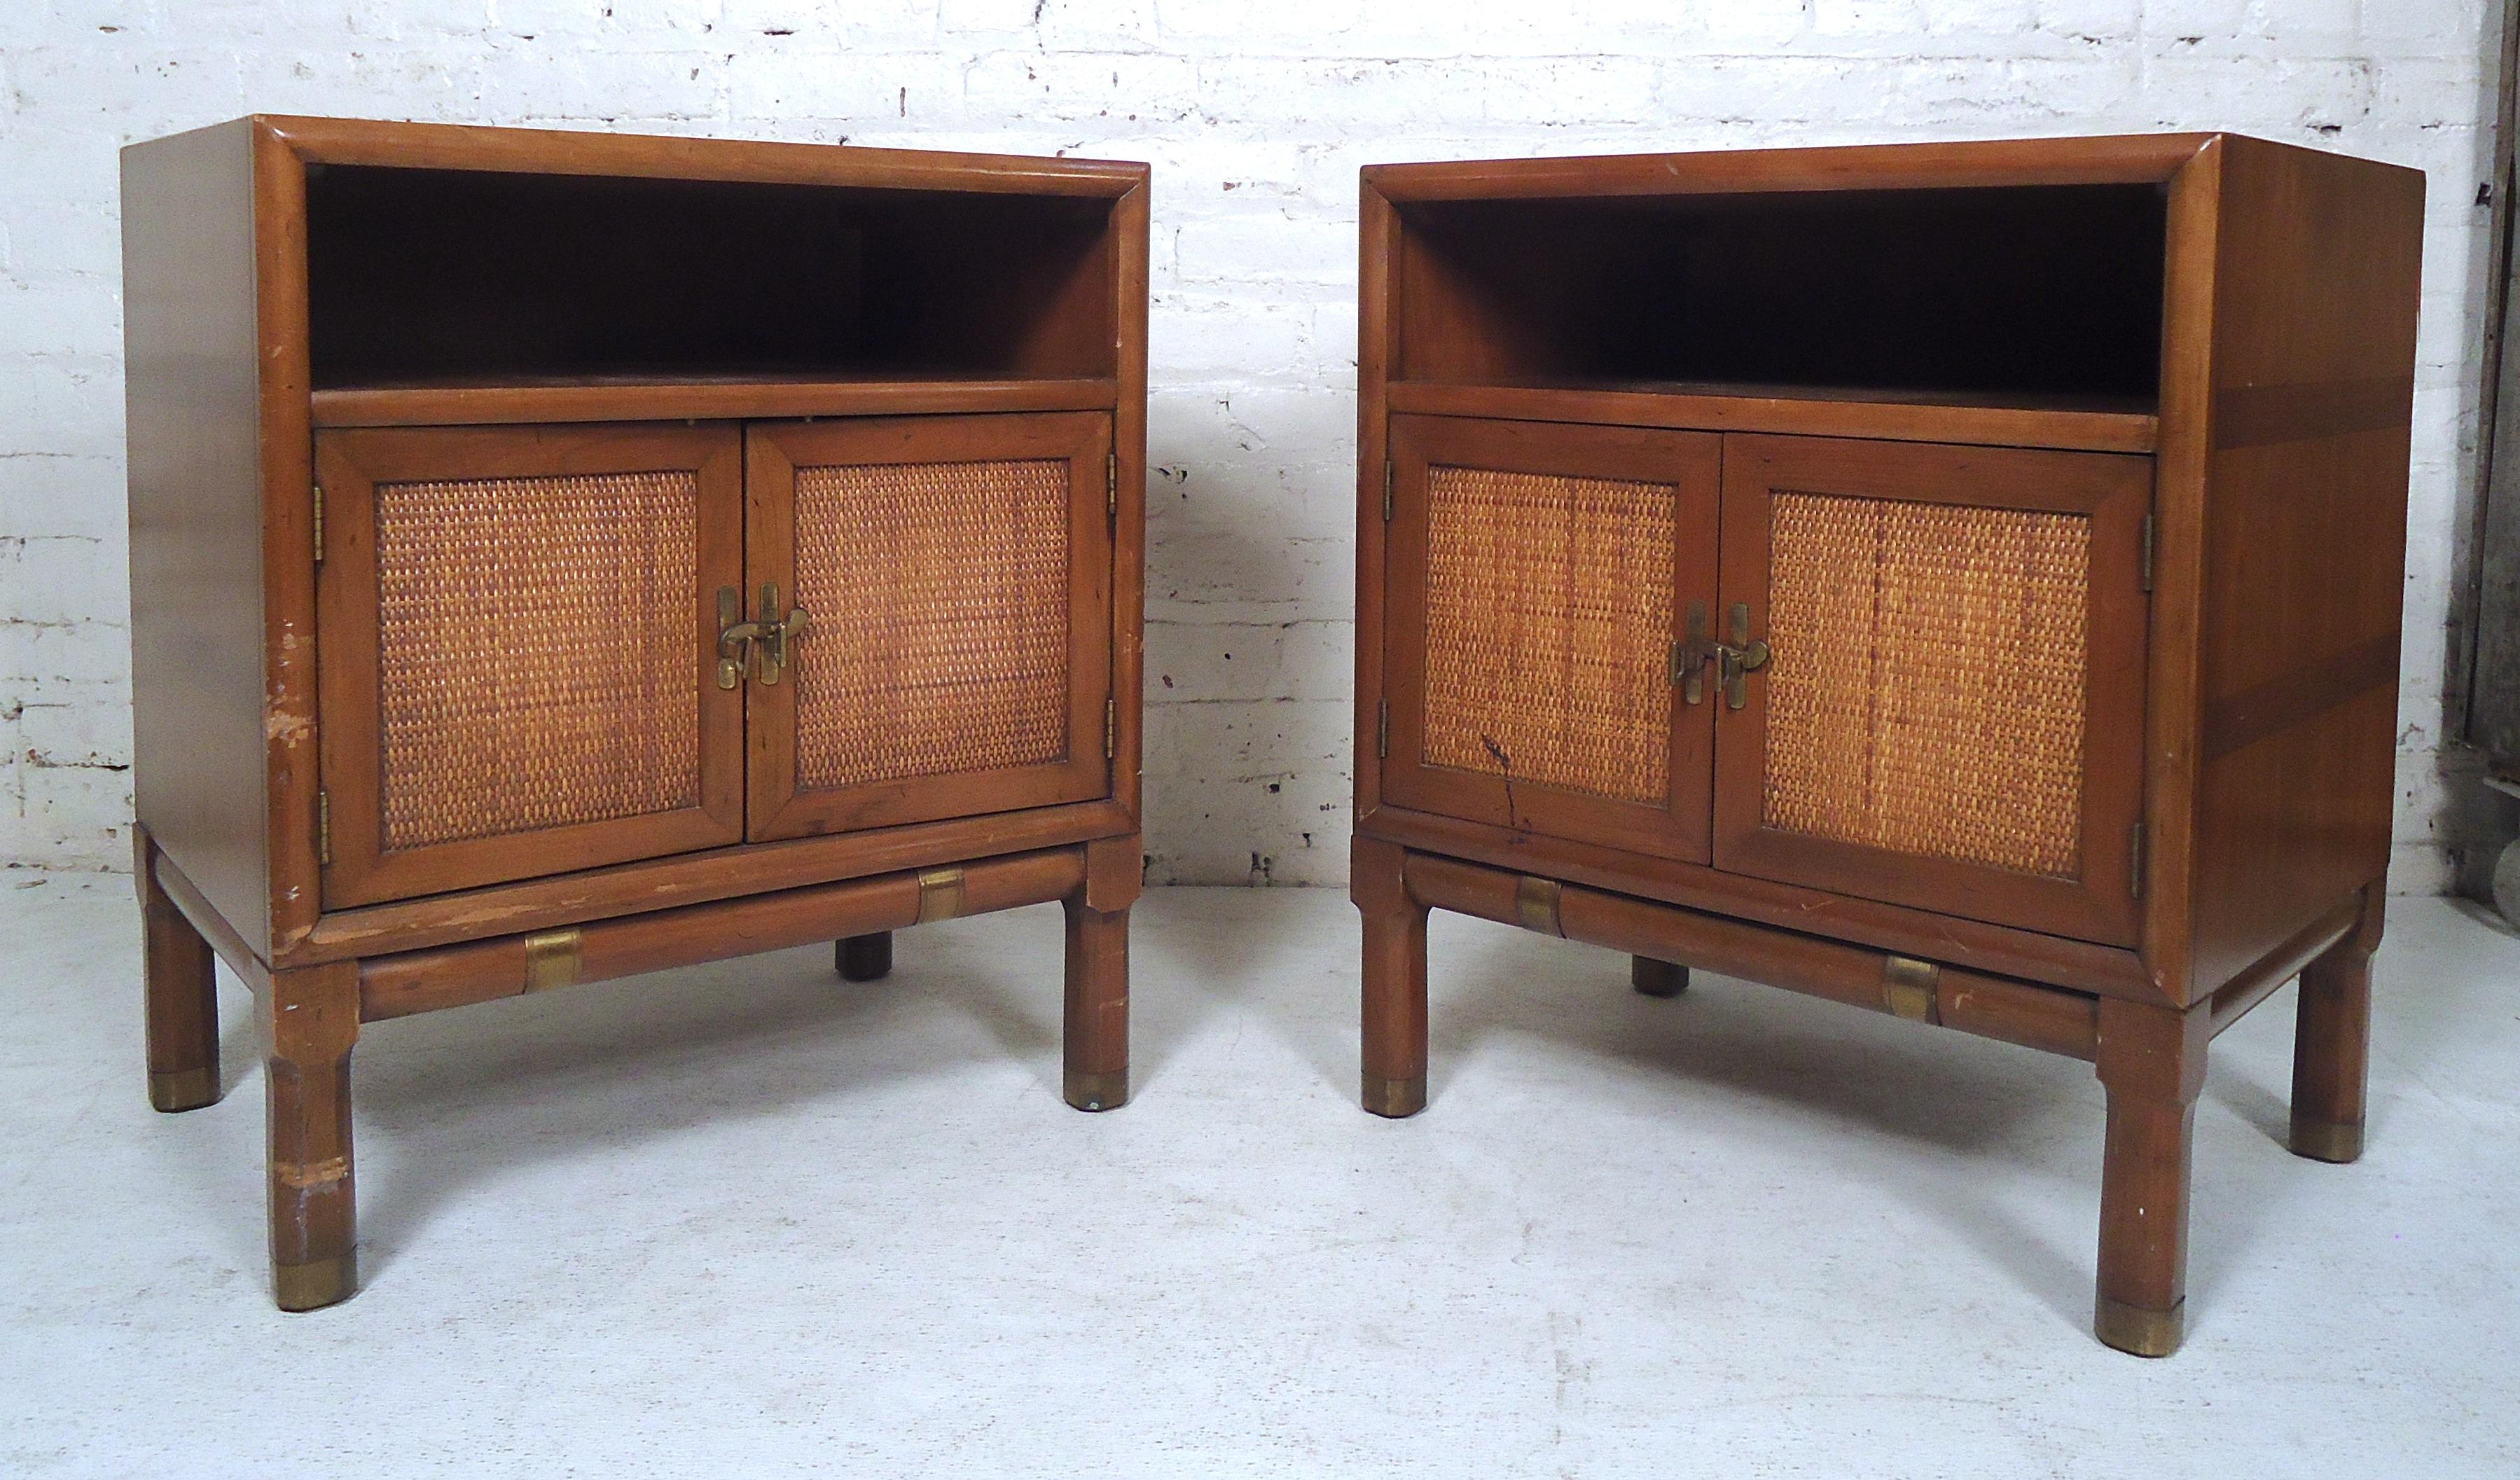 Gorgeous pair of vintage modern side tables featuring a rattan front, brass accents and a spacious storage unit.

Please confirm item location (NY or NJ).